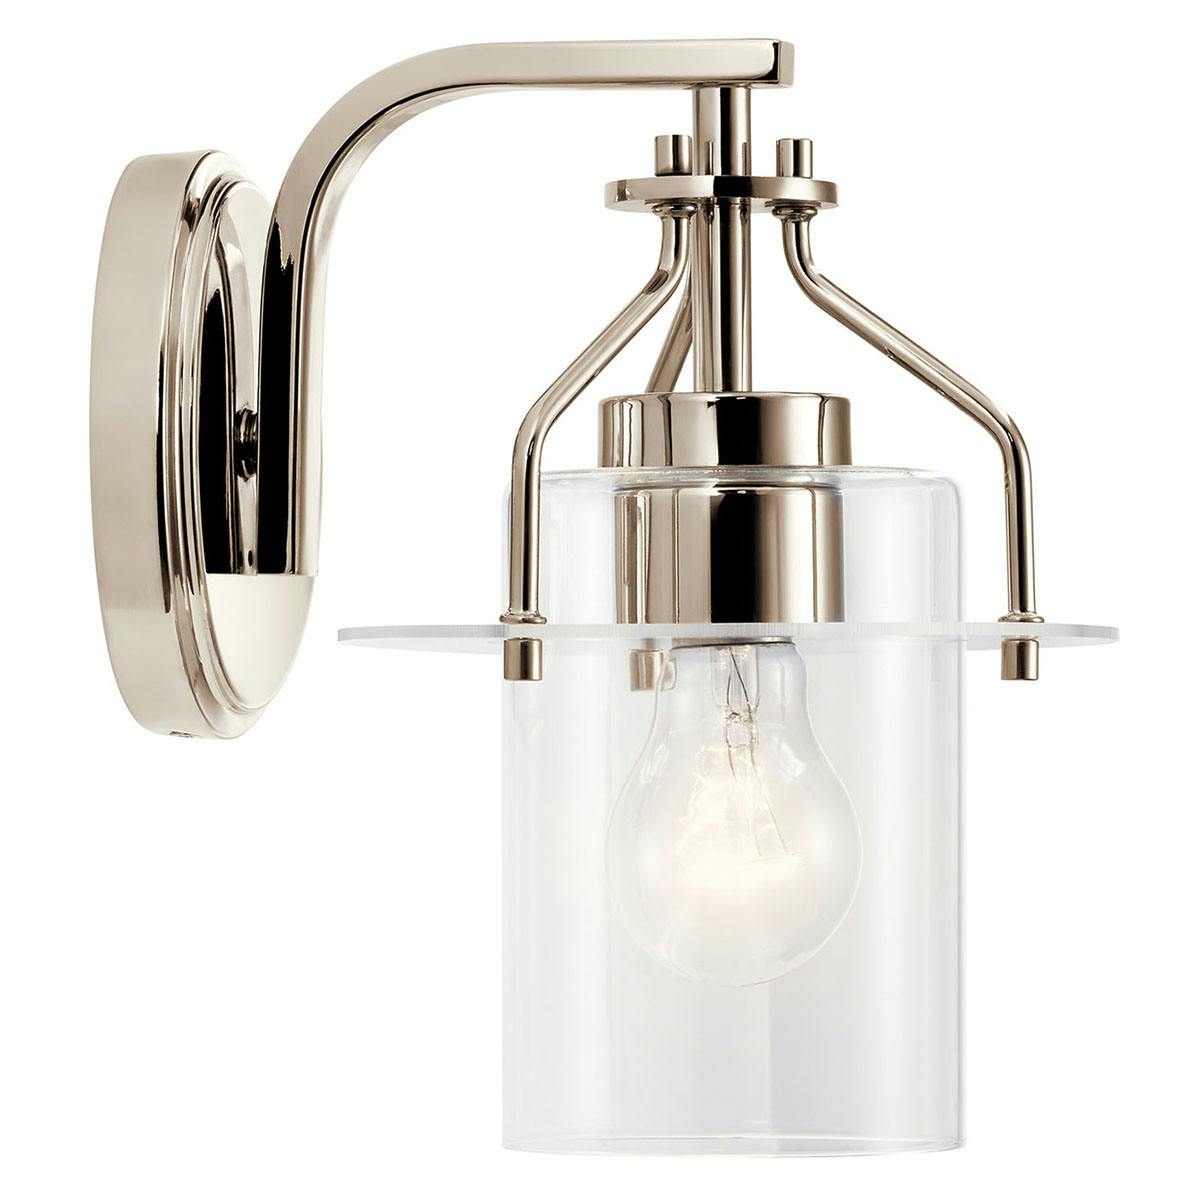 Profile view of the Everett 1 Light Sconce in Nickel on a white background